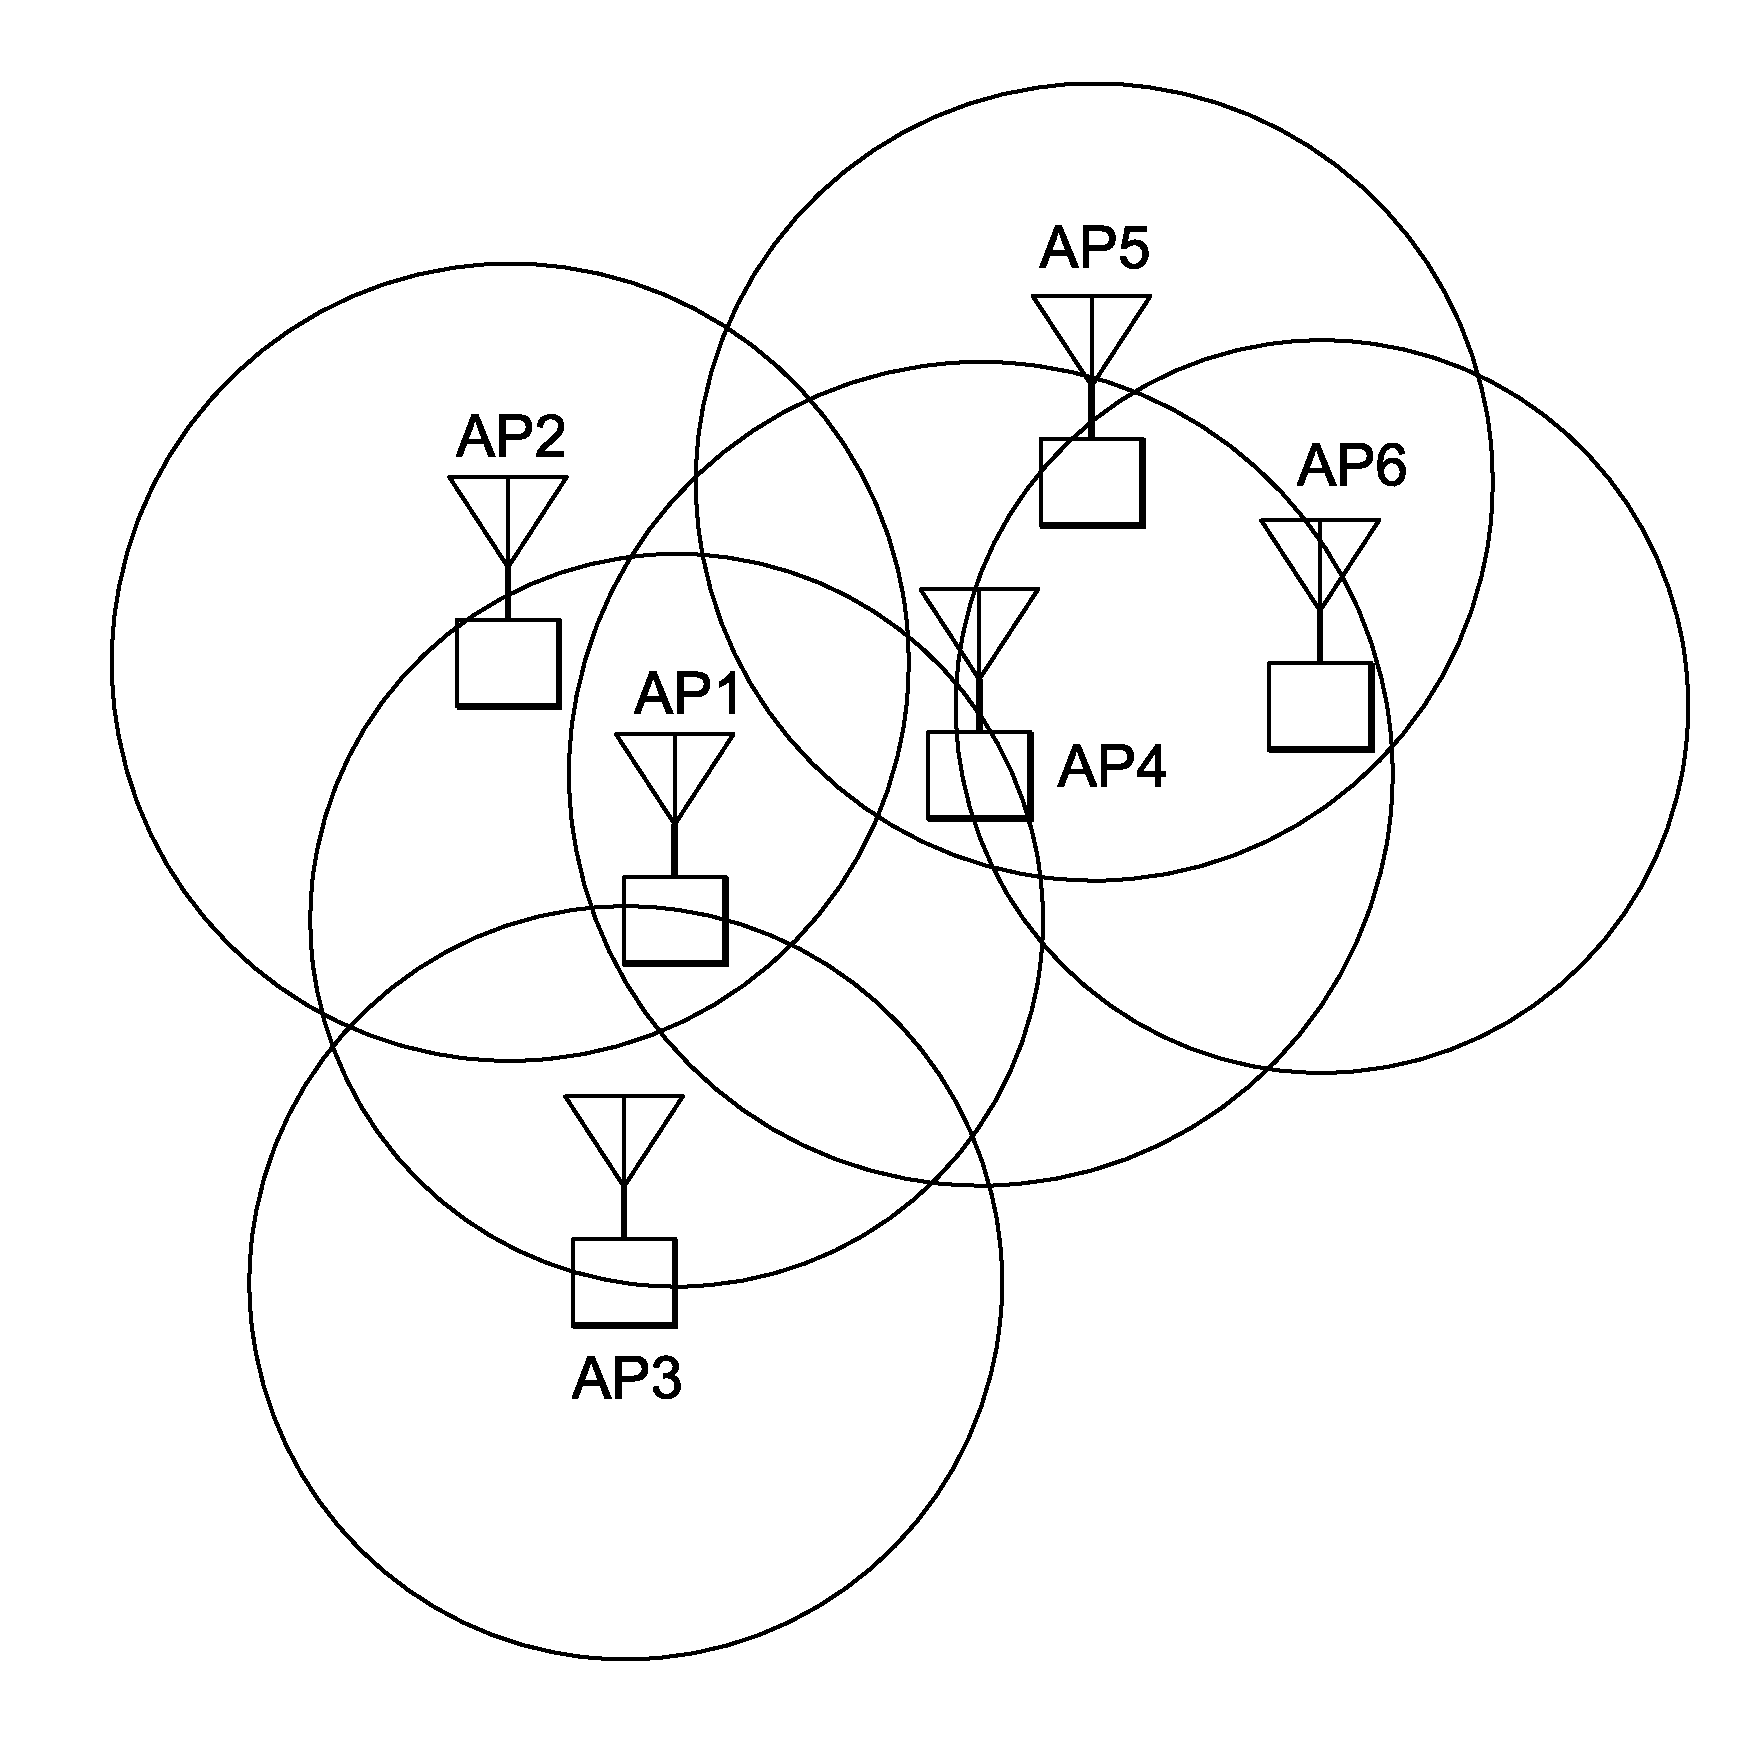 White space usage for wireleess local area network devices